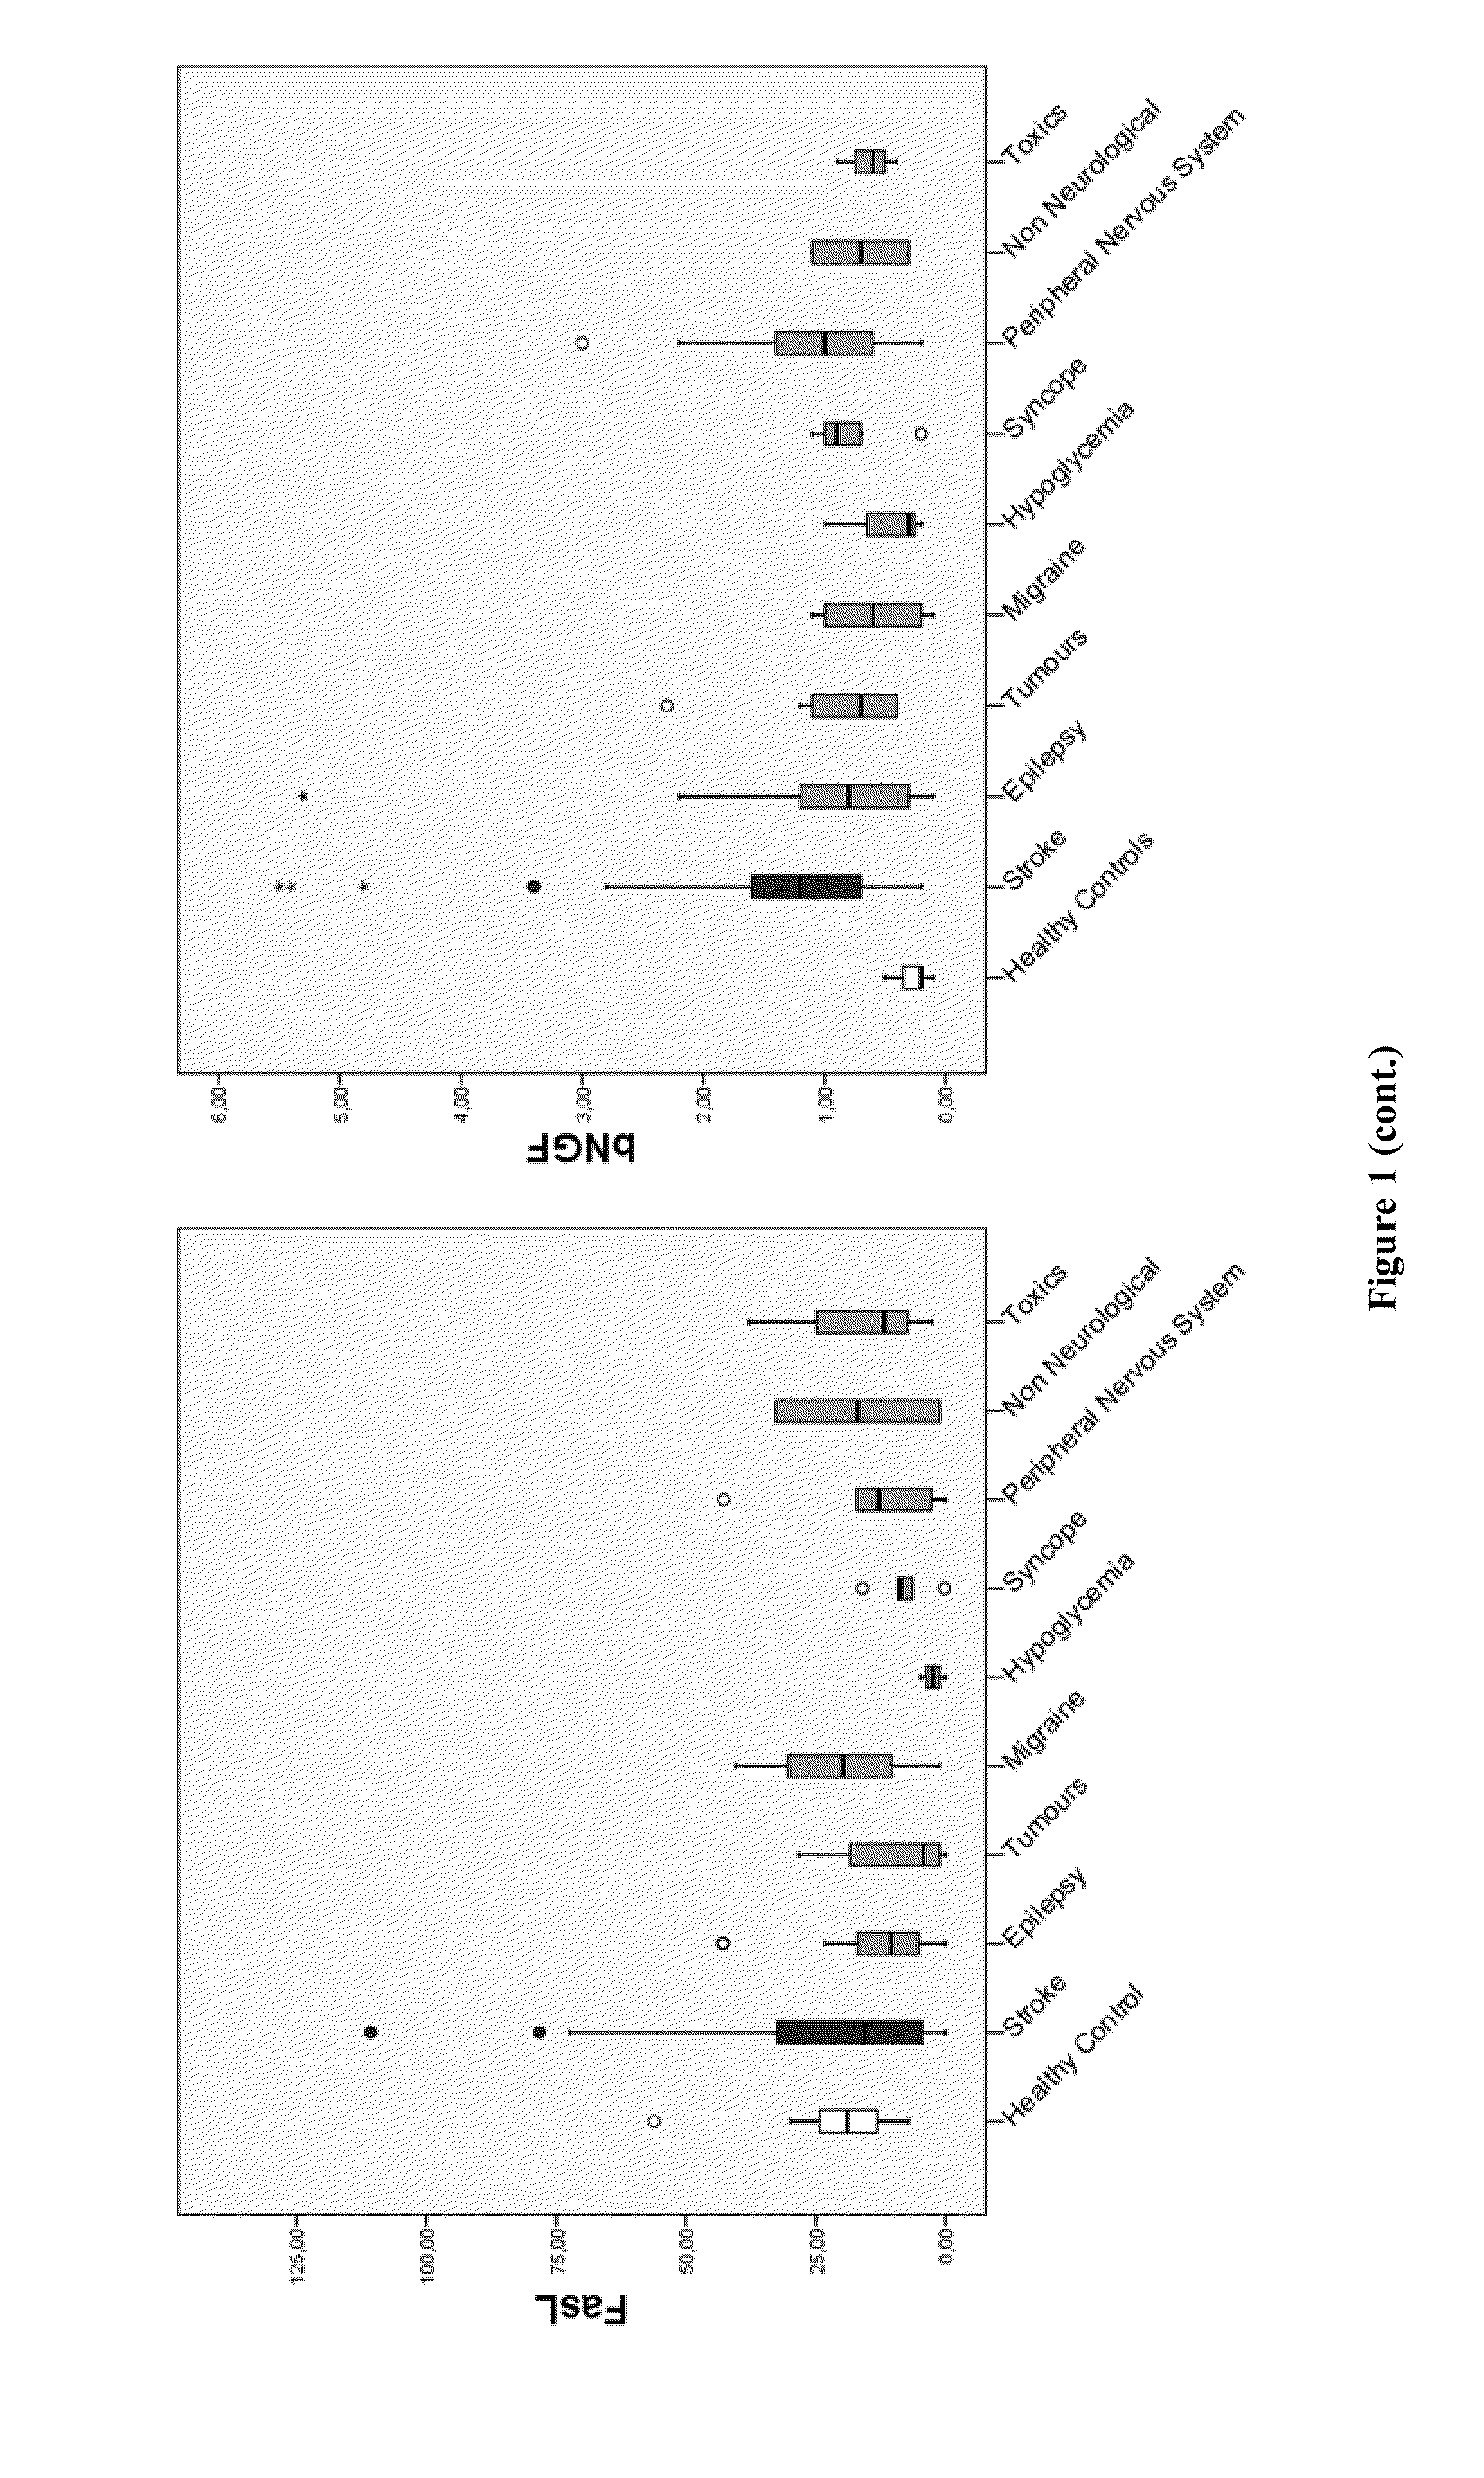 Differential diagnostic biomarkers of stroke mimicking conditions and methods of use thereof